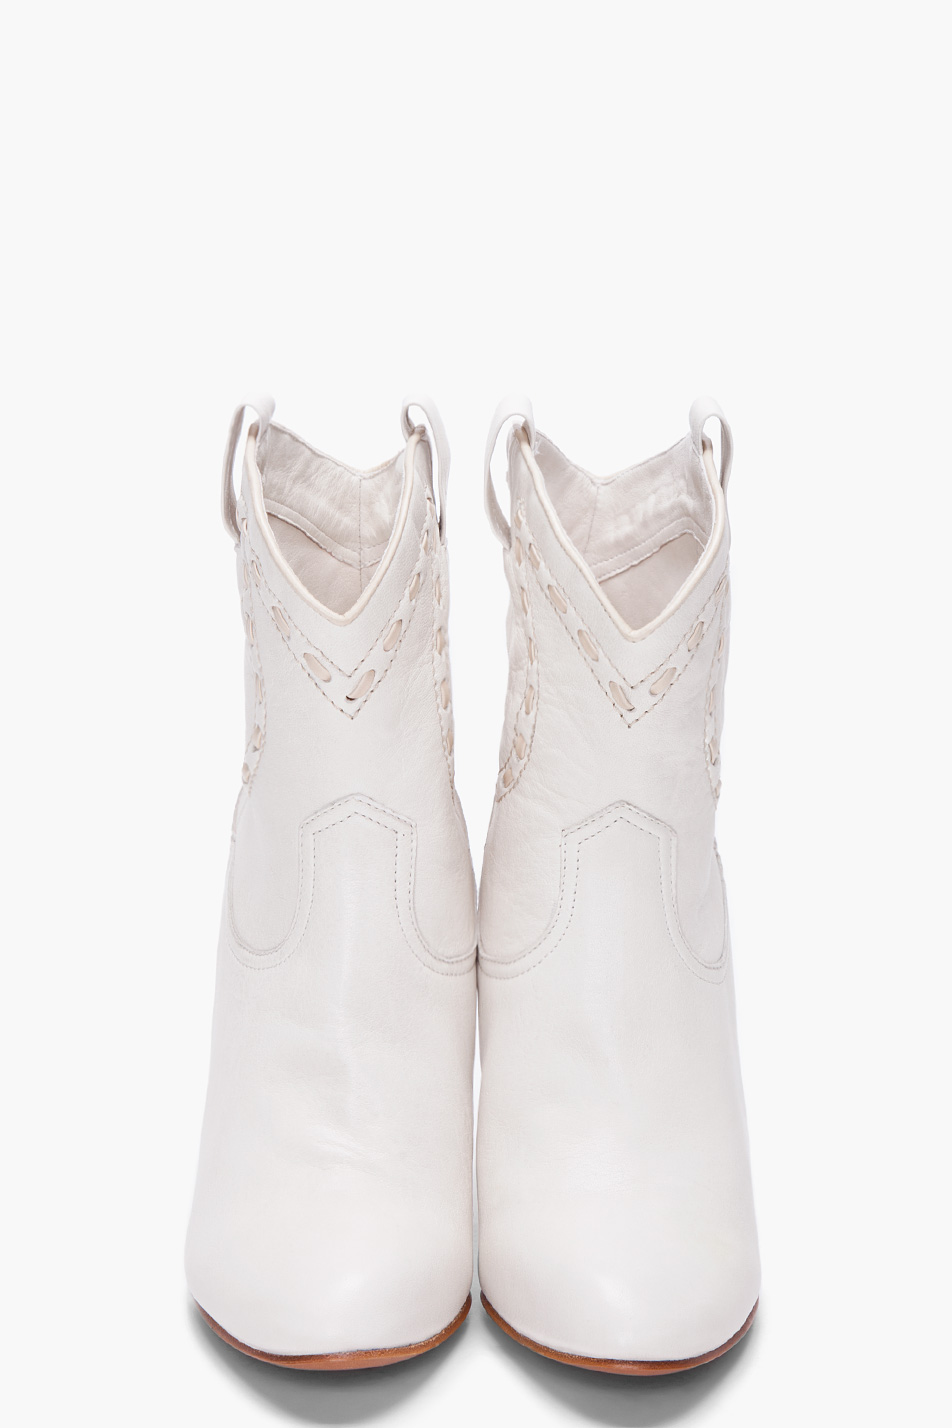 Lyst - Marc jacobs White Cowboy Boot in White